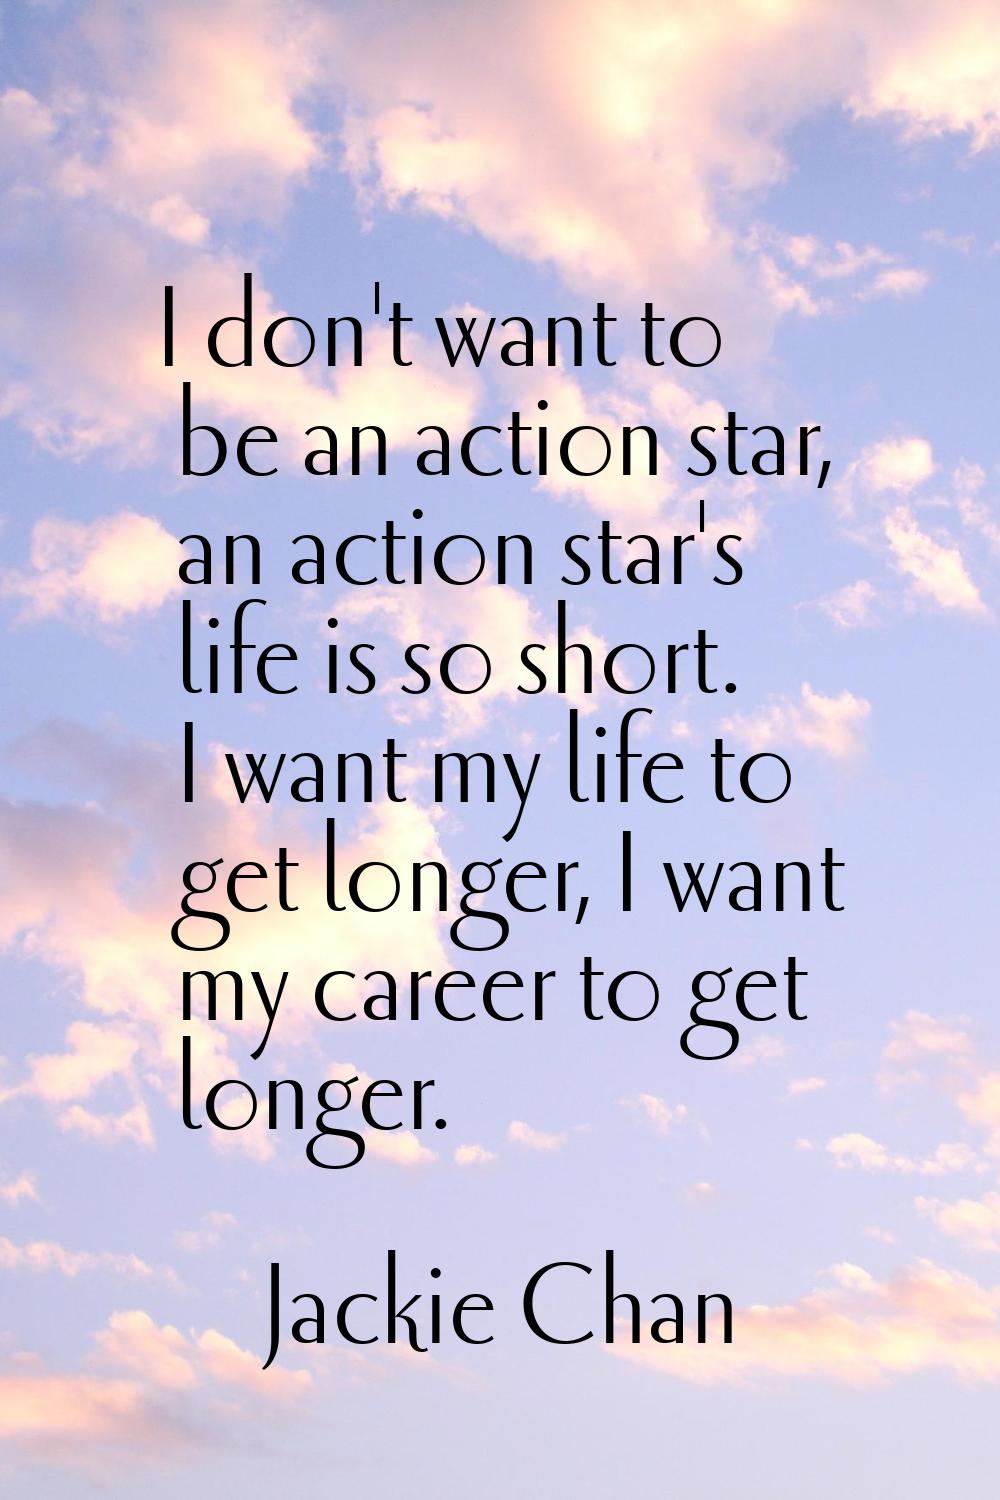 I don't want to be an action star, an action star's life is so short. I want my life to get longer,